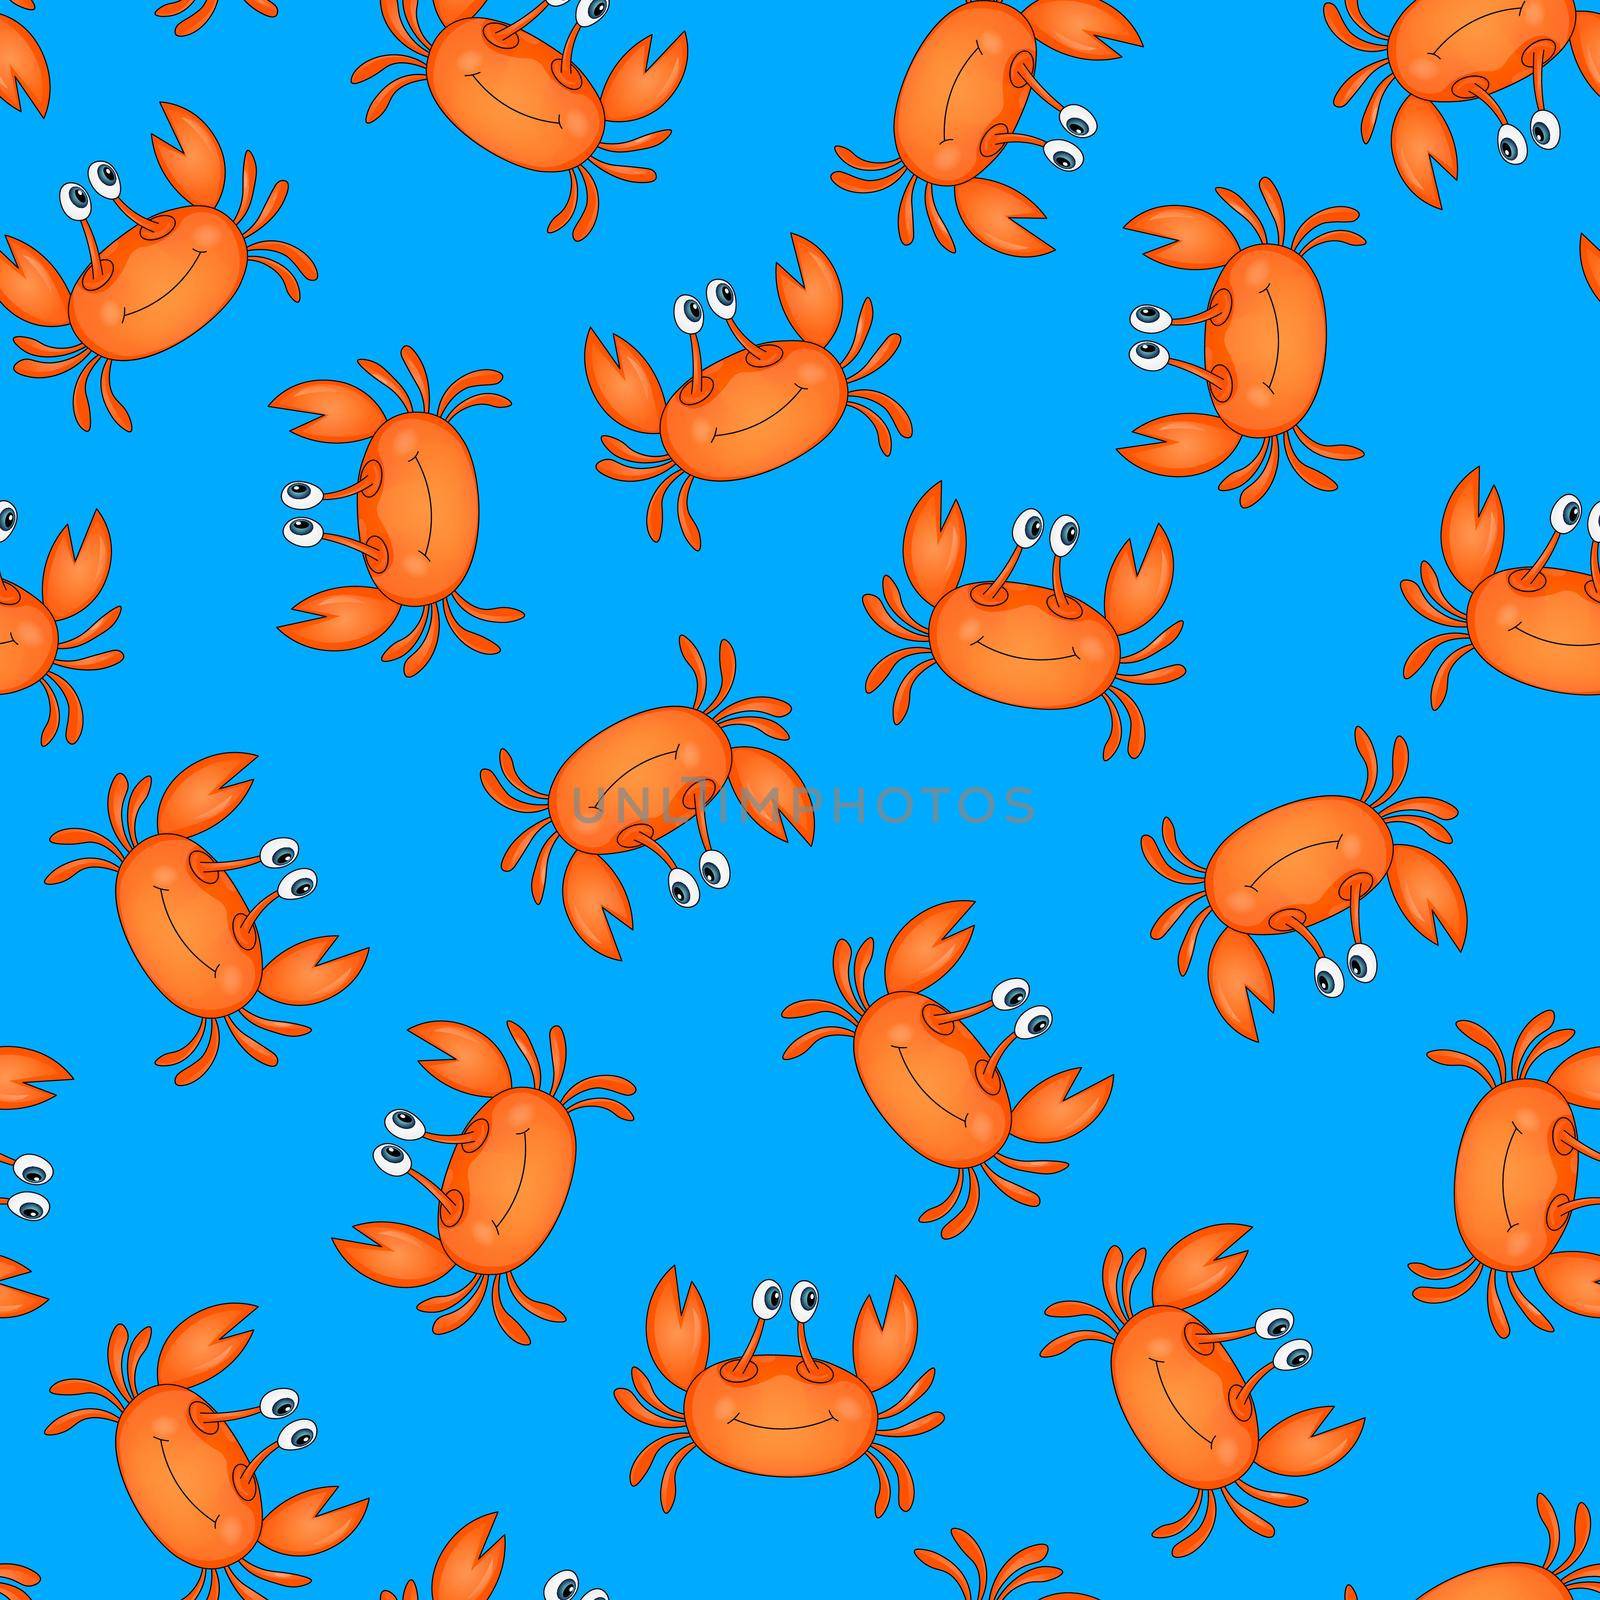 Seamless pattern with cute orange crab on blue background. Vector animals colorful illustration. Adorable character for cards, wallpaper, textile, fabric, kindergarten. Cartoon style.